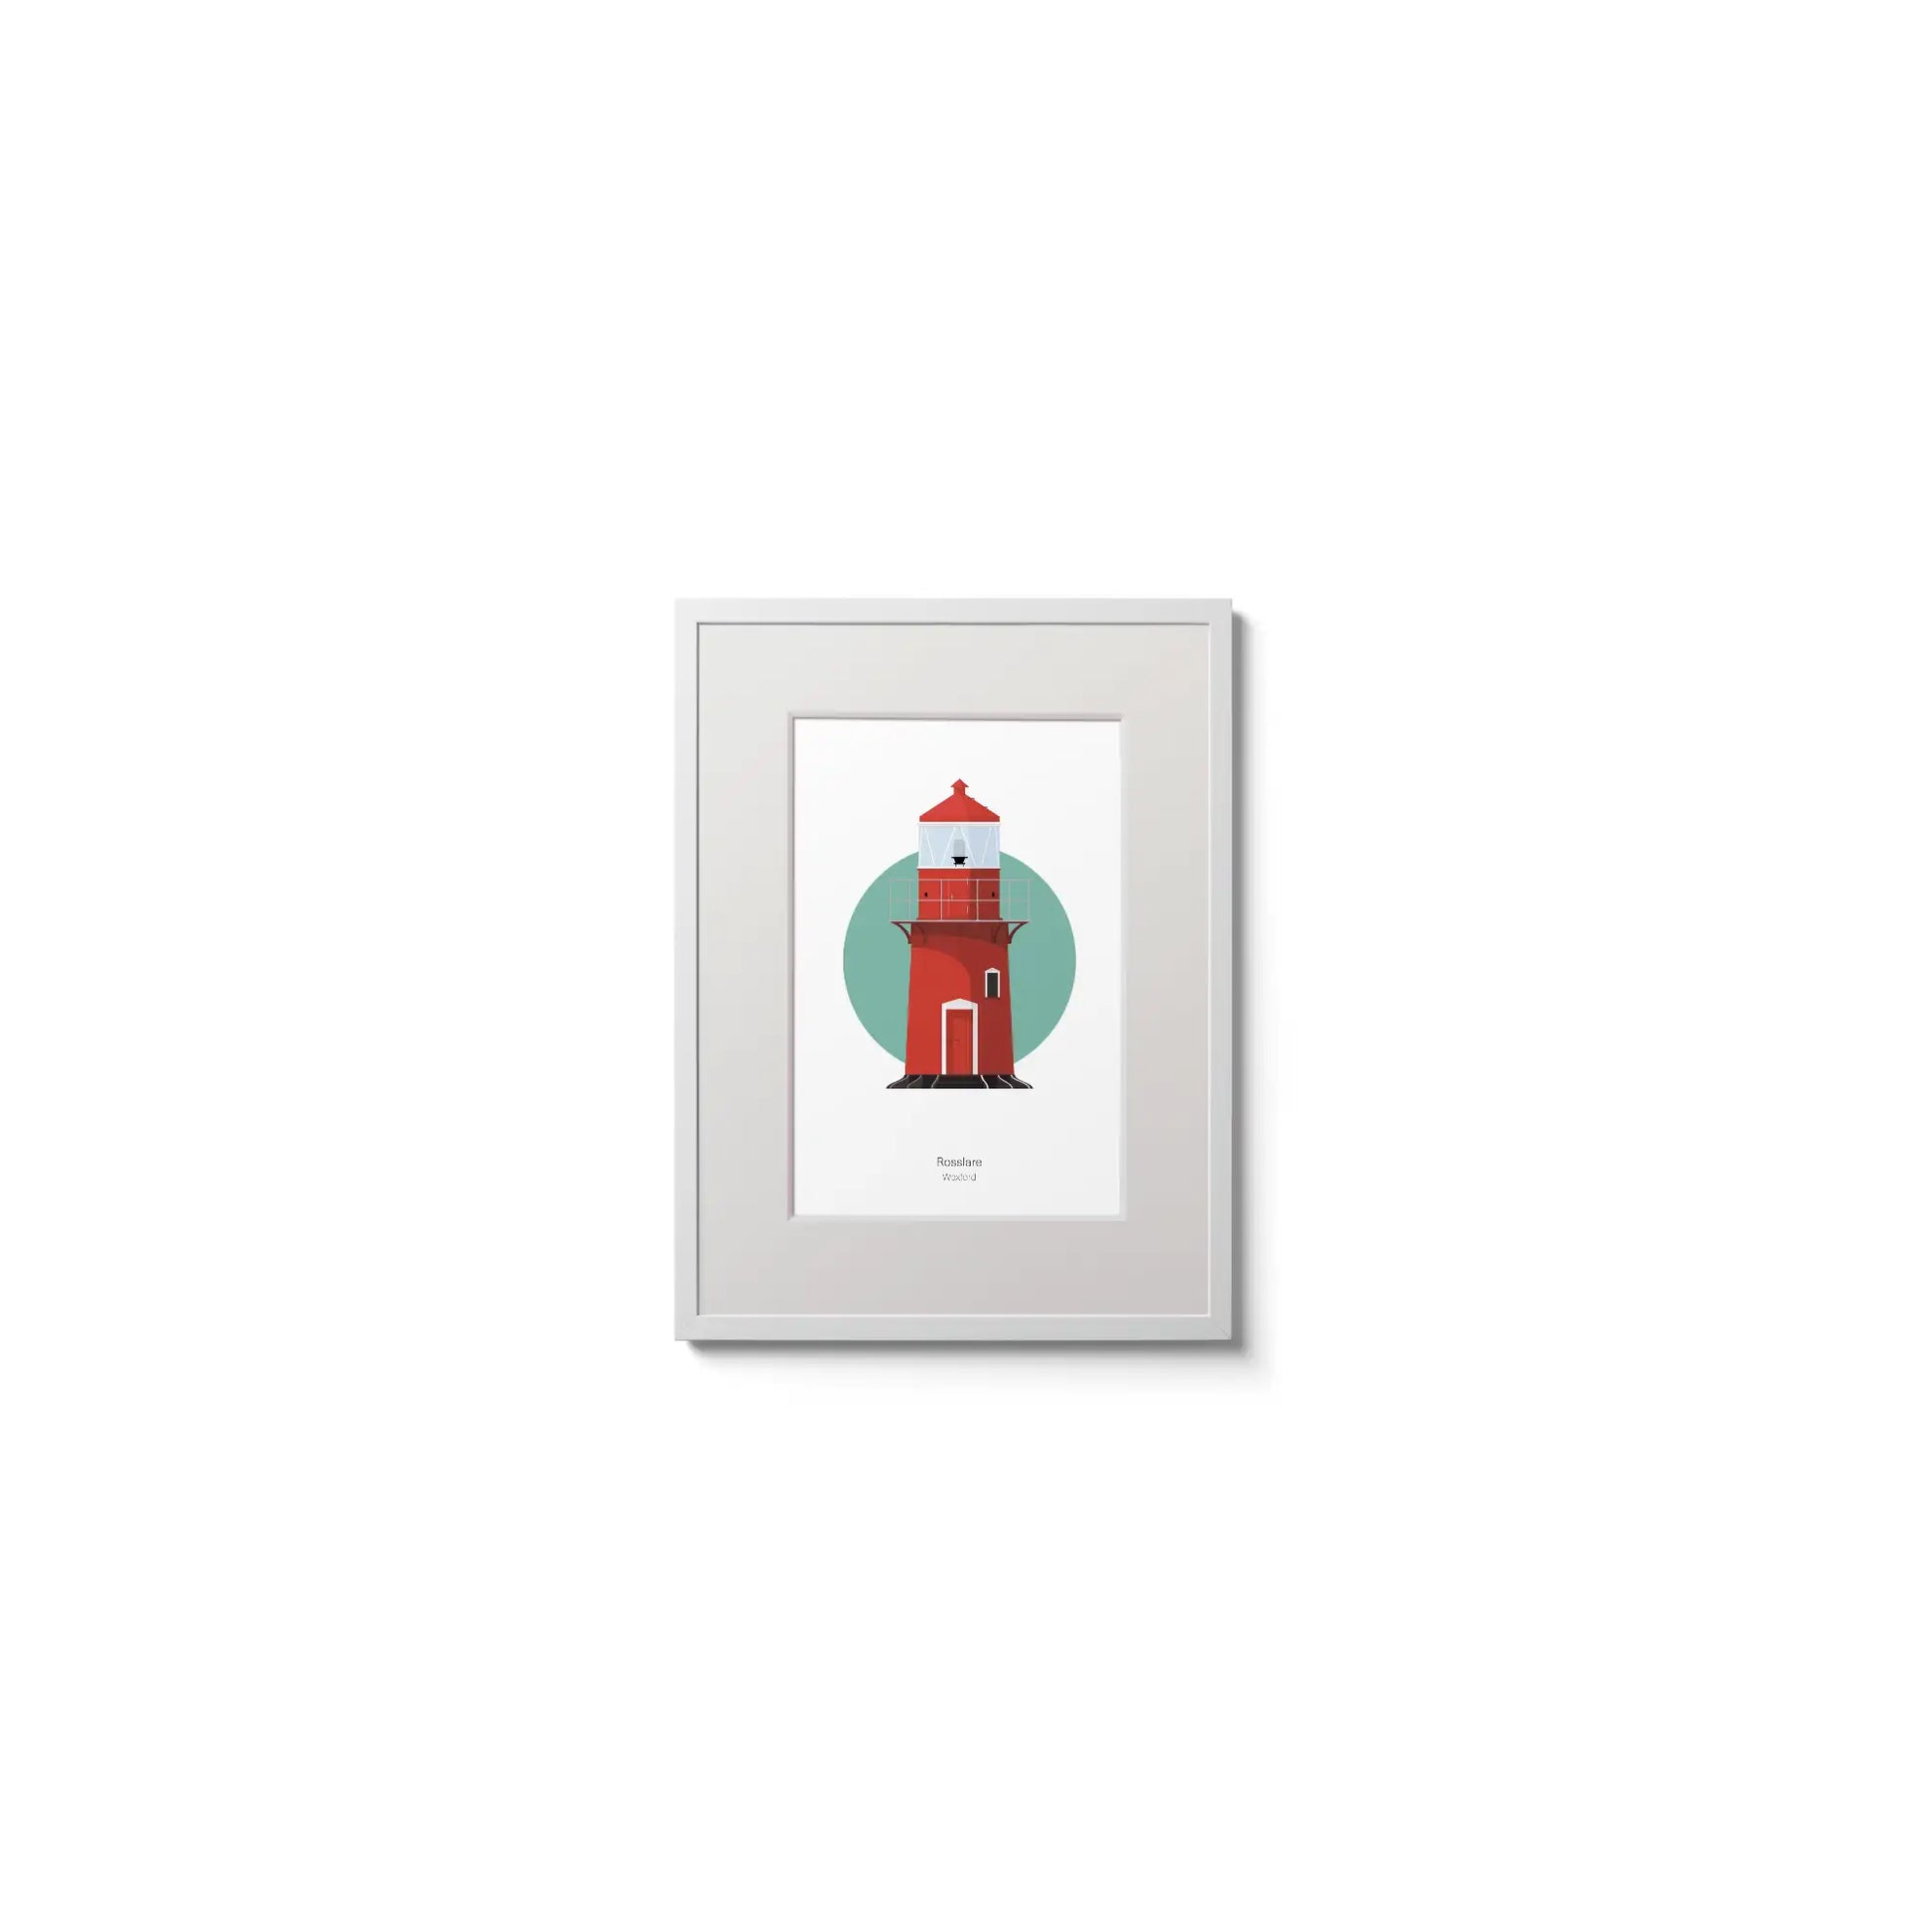 Illustration of Rosslare Harbour lighthouse on a white background inside light blue square,  in a white frame measuring 15x20cm.